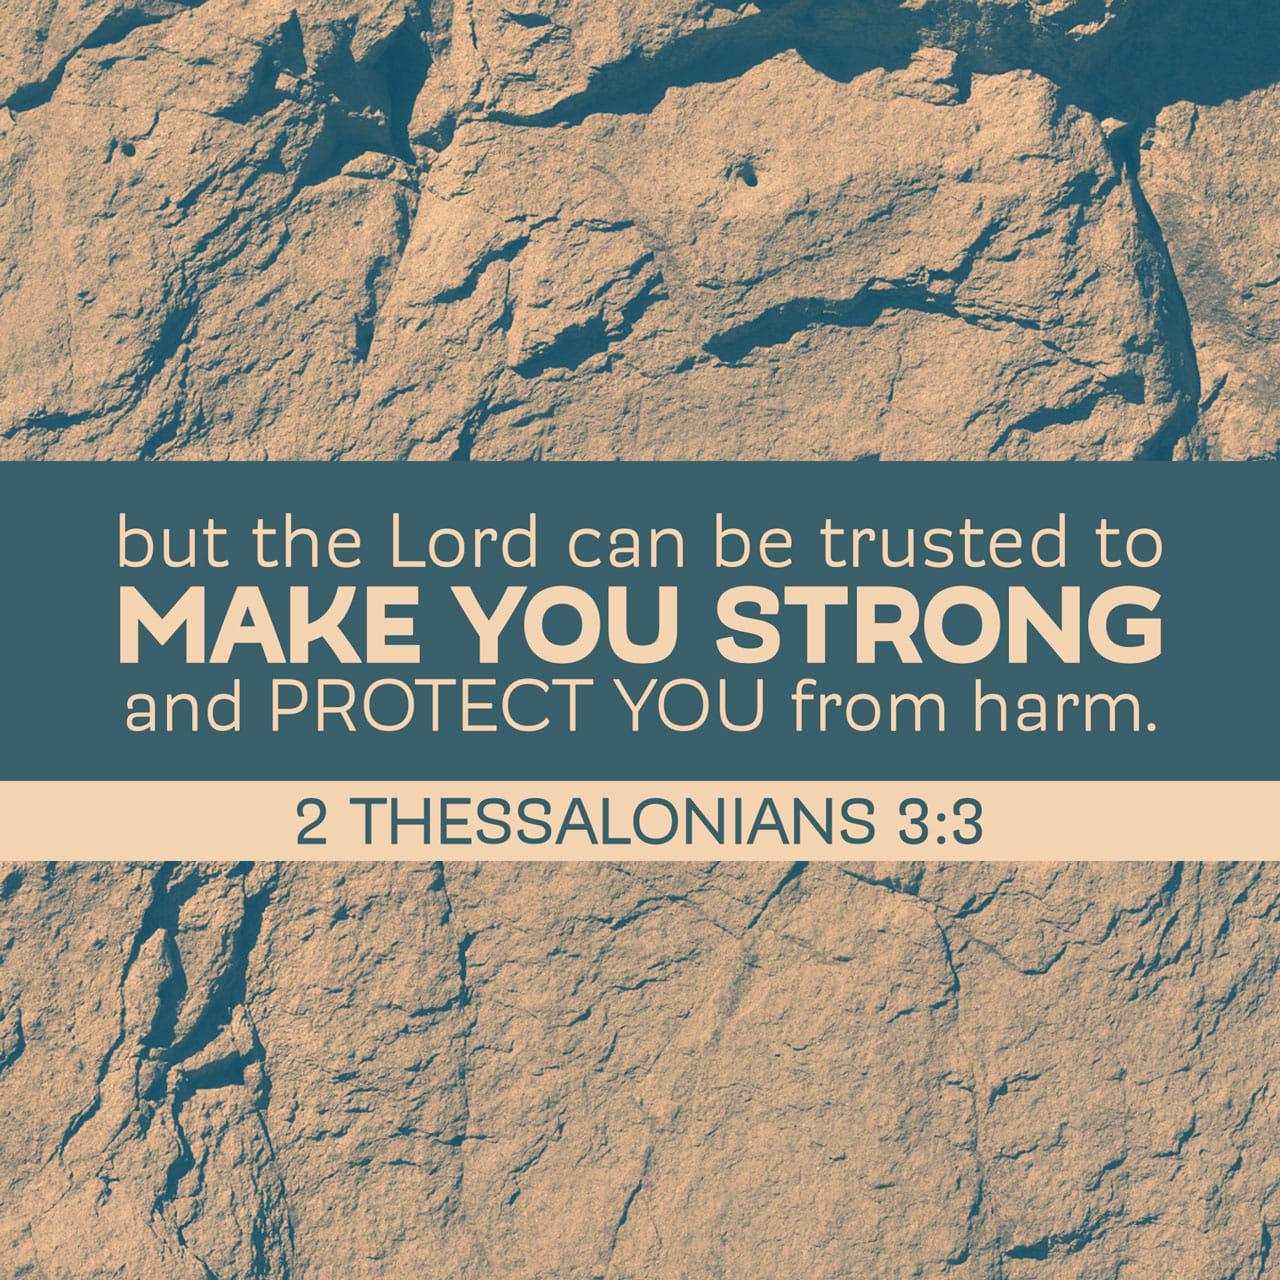 Bible Verse of the Day - day 88 - image 290 (2 Thessalonians 3:3)